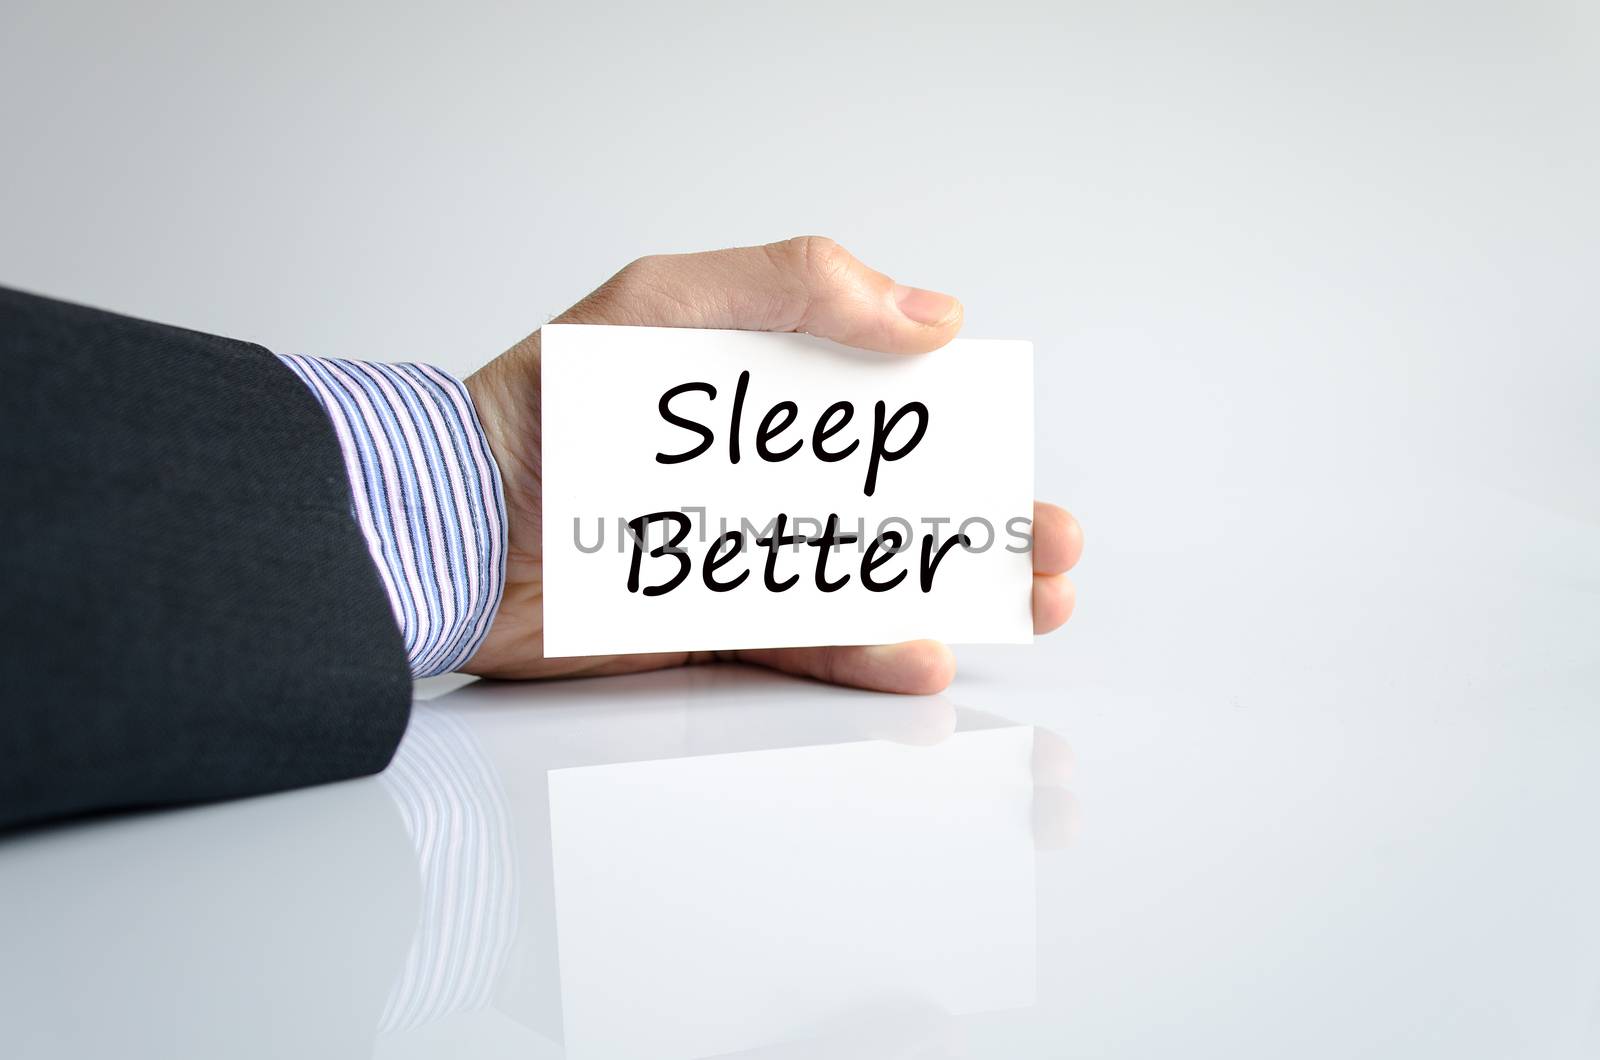 Sleep better text concept isolated over white background